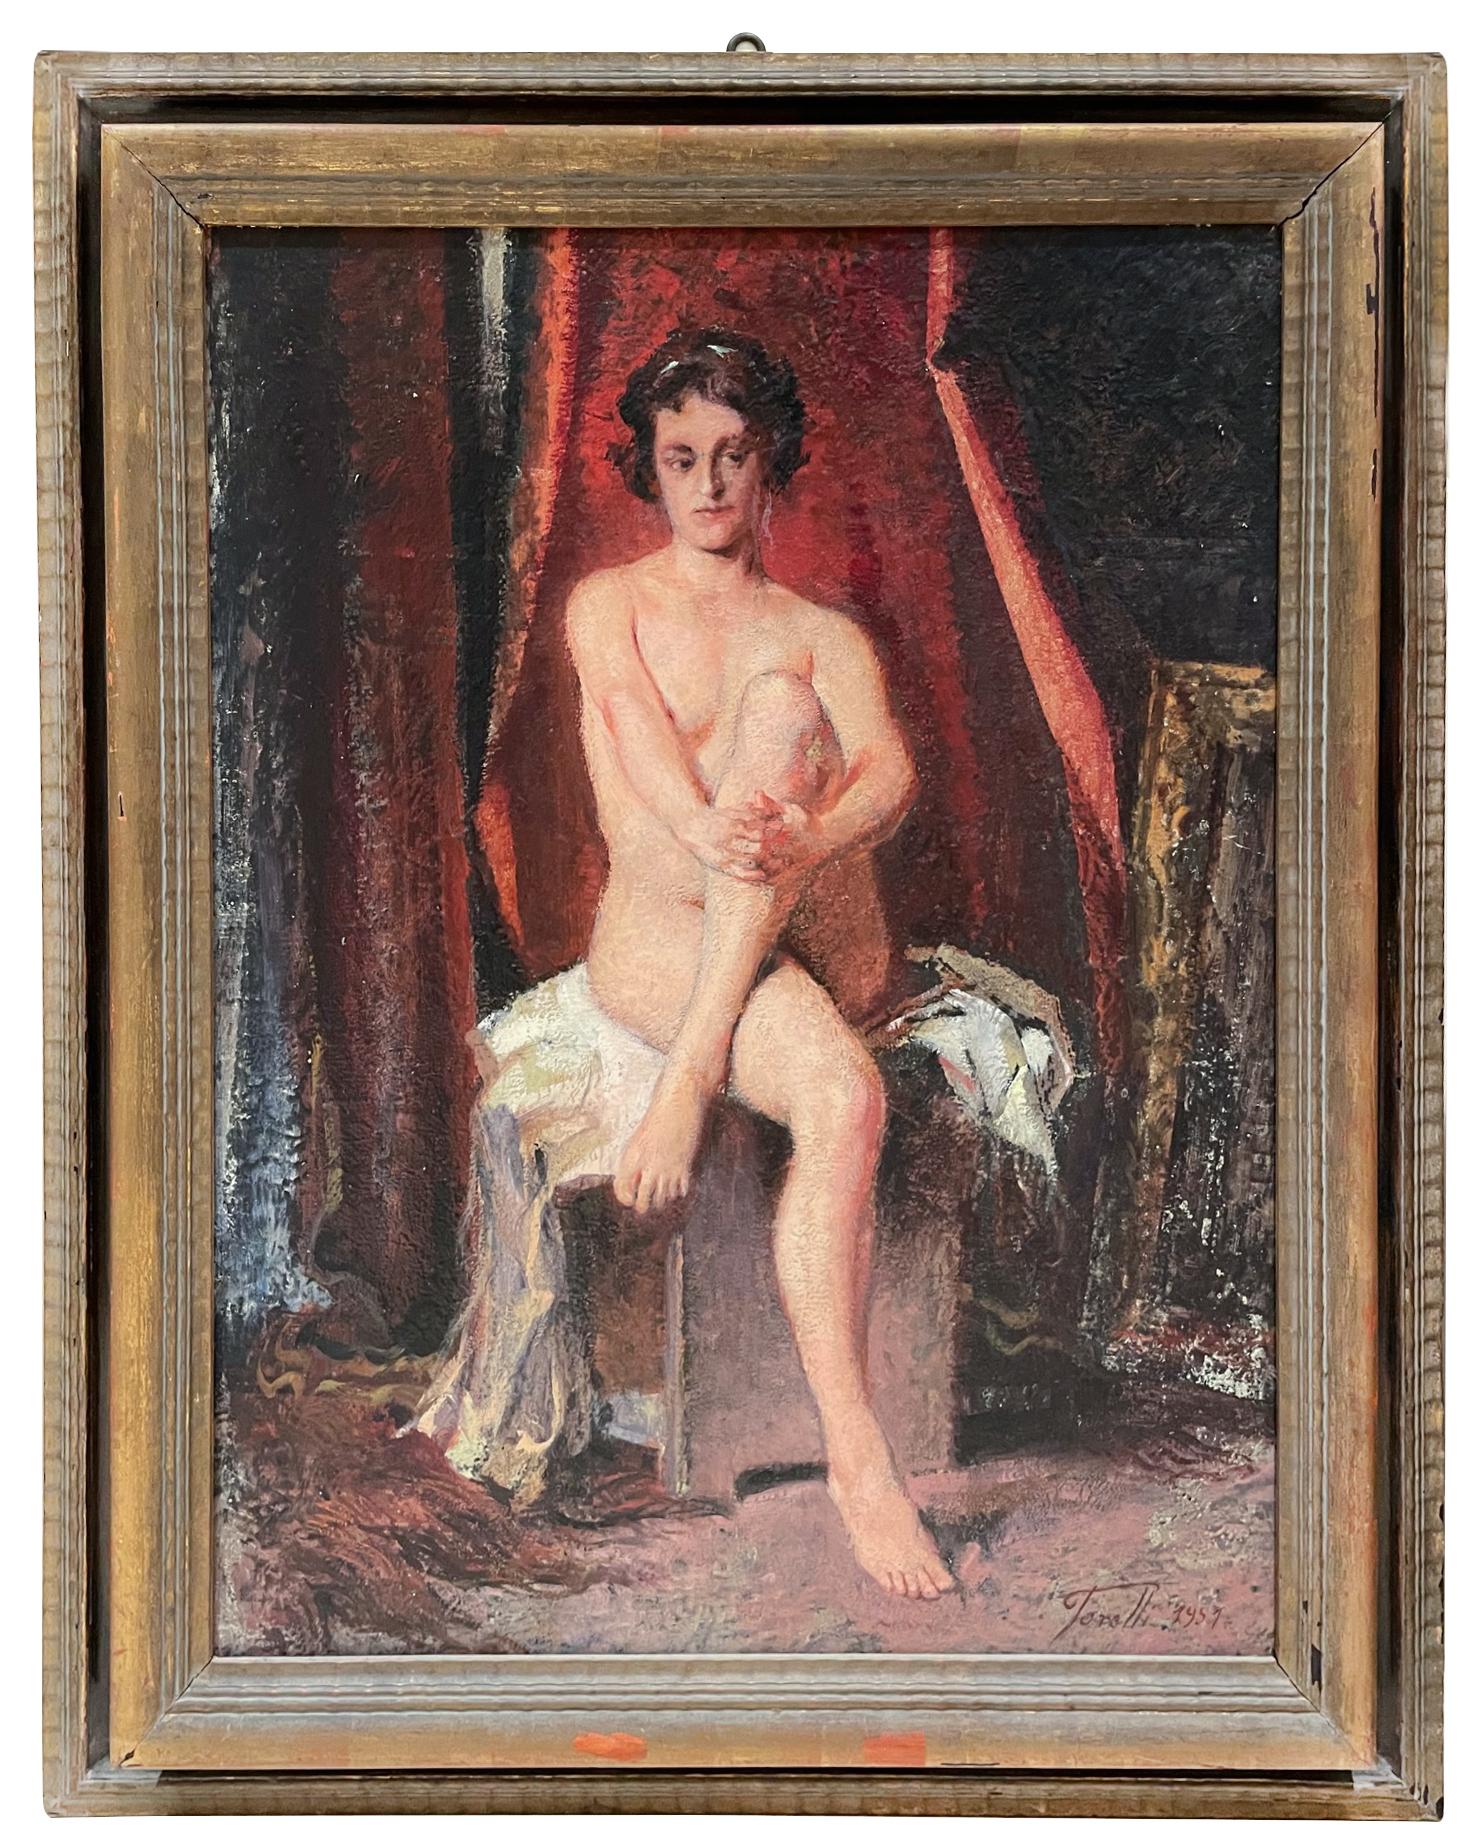 Seated Nude is an artwork realized by Giuseppe Torelli in 1950s. 

Oil on cardboard.

64x48 cm with frame. 

Handsigned in the lower right margin.